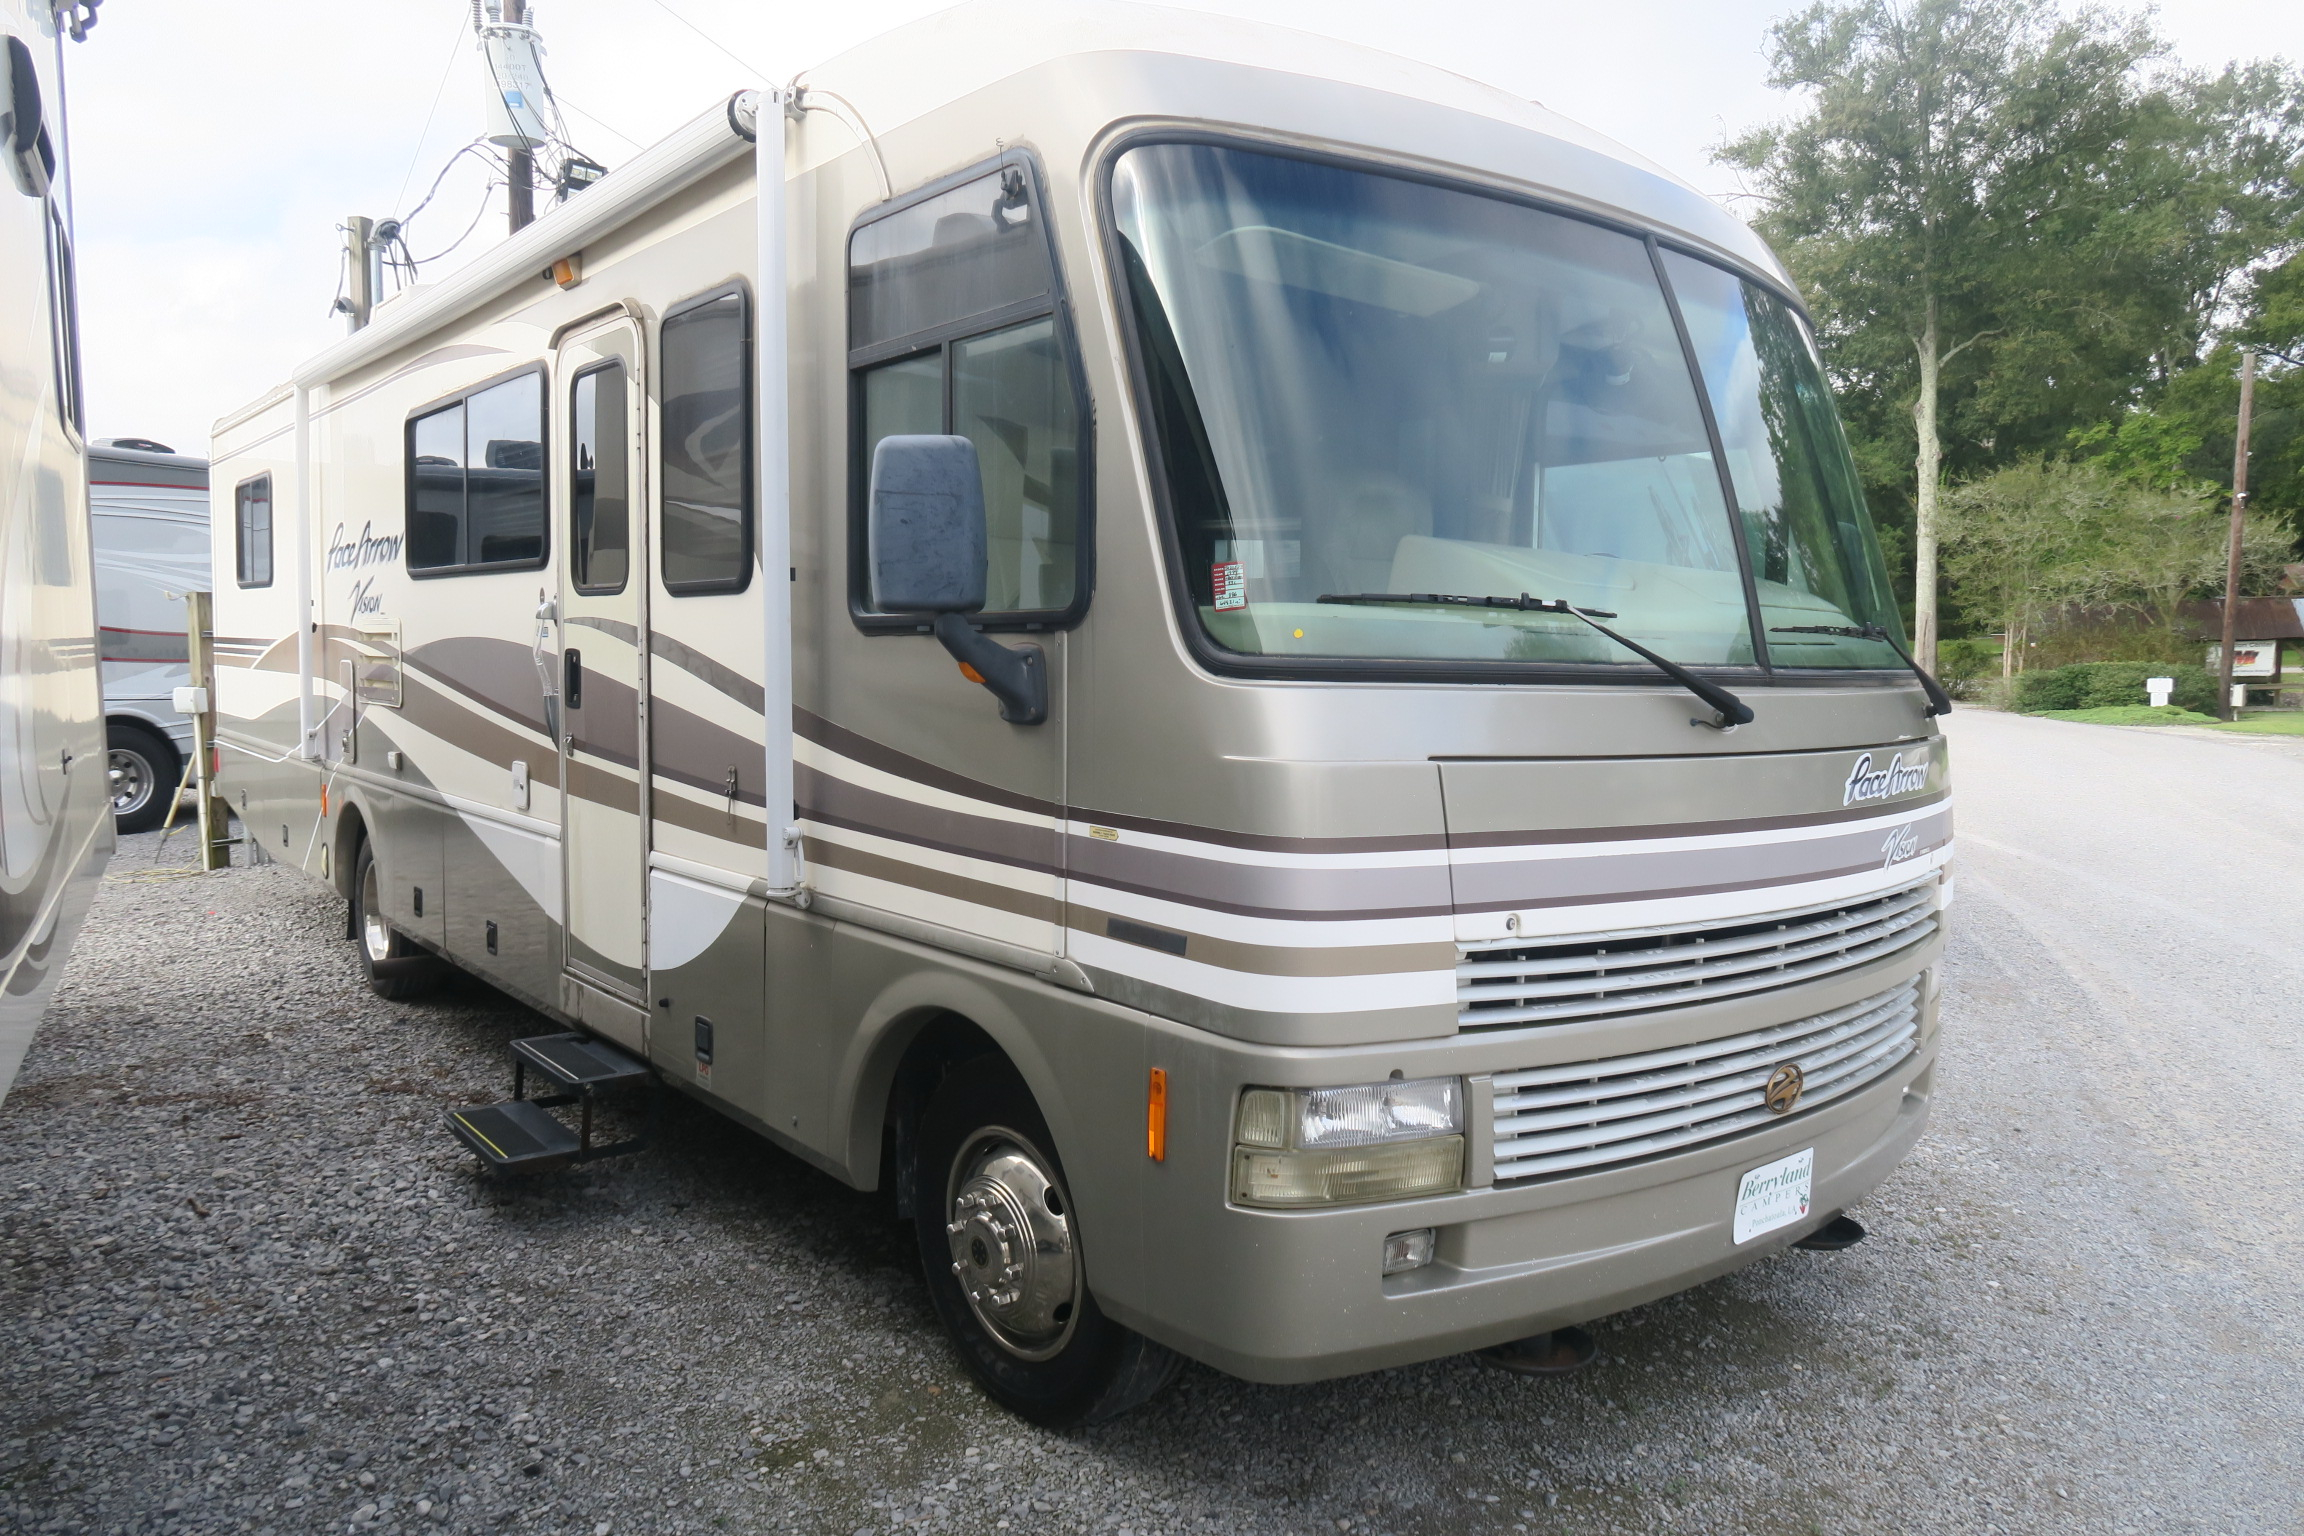 USED 1999 PACE ARROW VISION - Overview | Berryland Campers 1999 Pace Arrow Motorhome For Sale